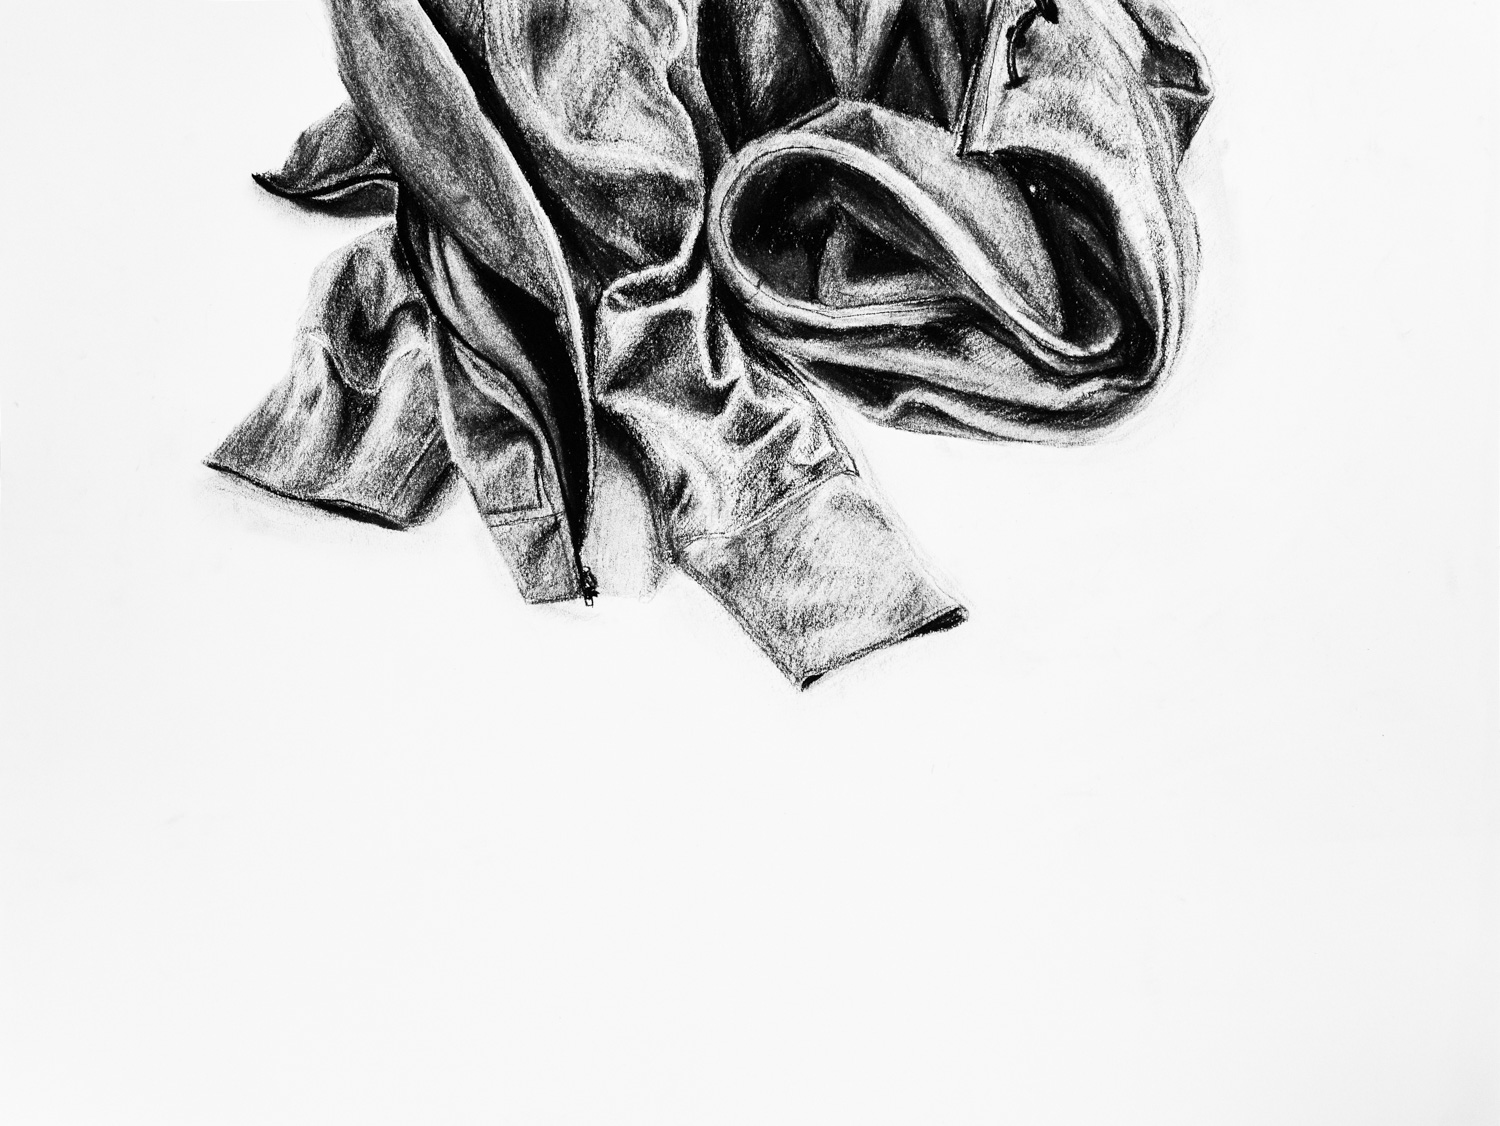 Charcoal drawing of a jacket.